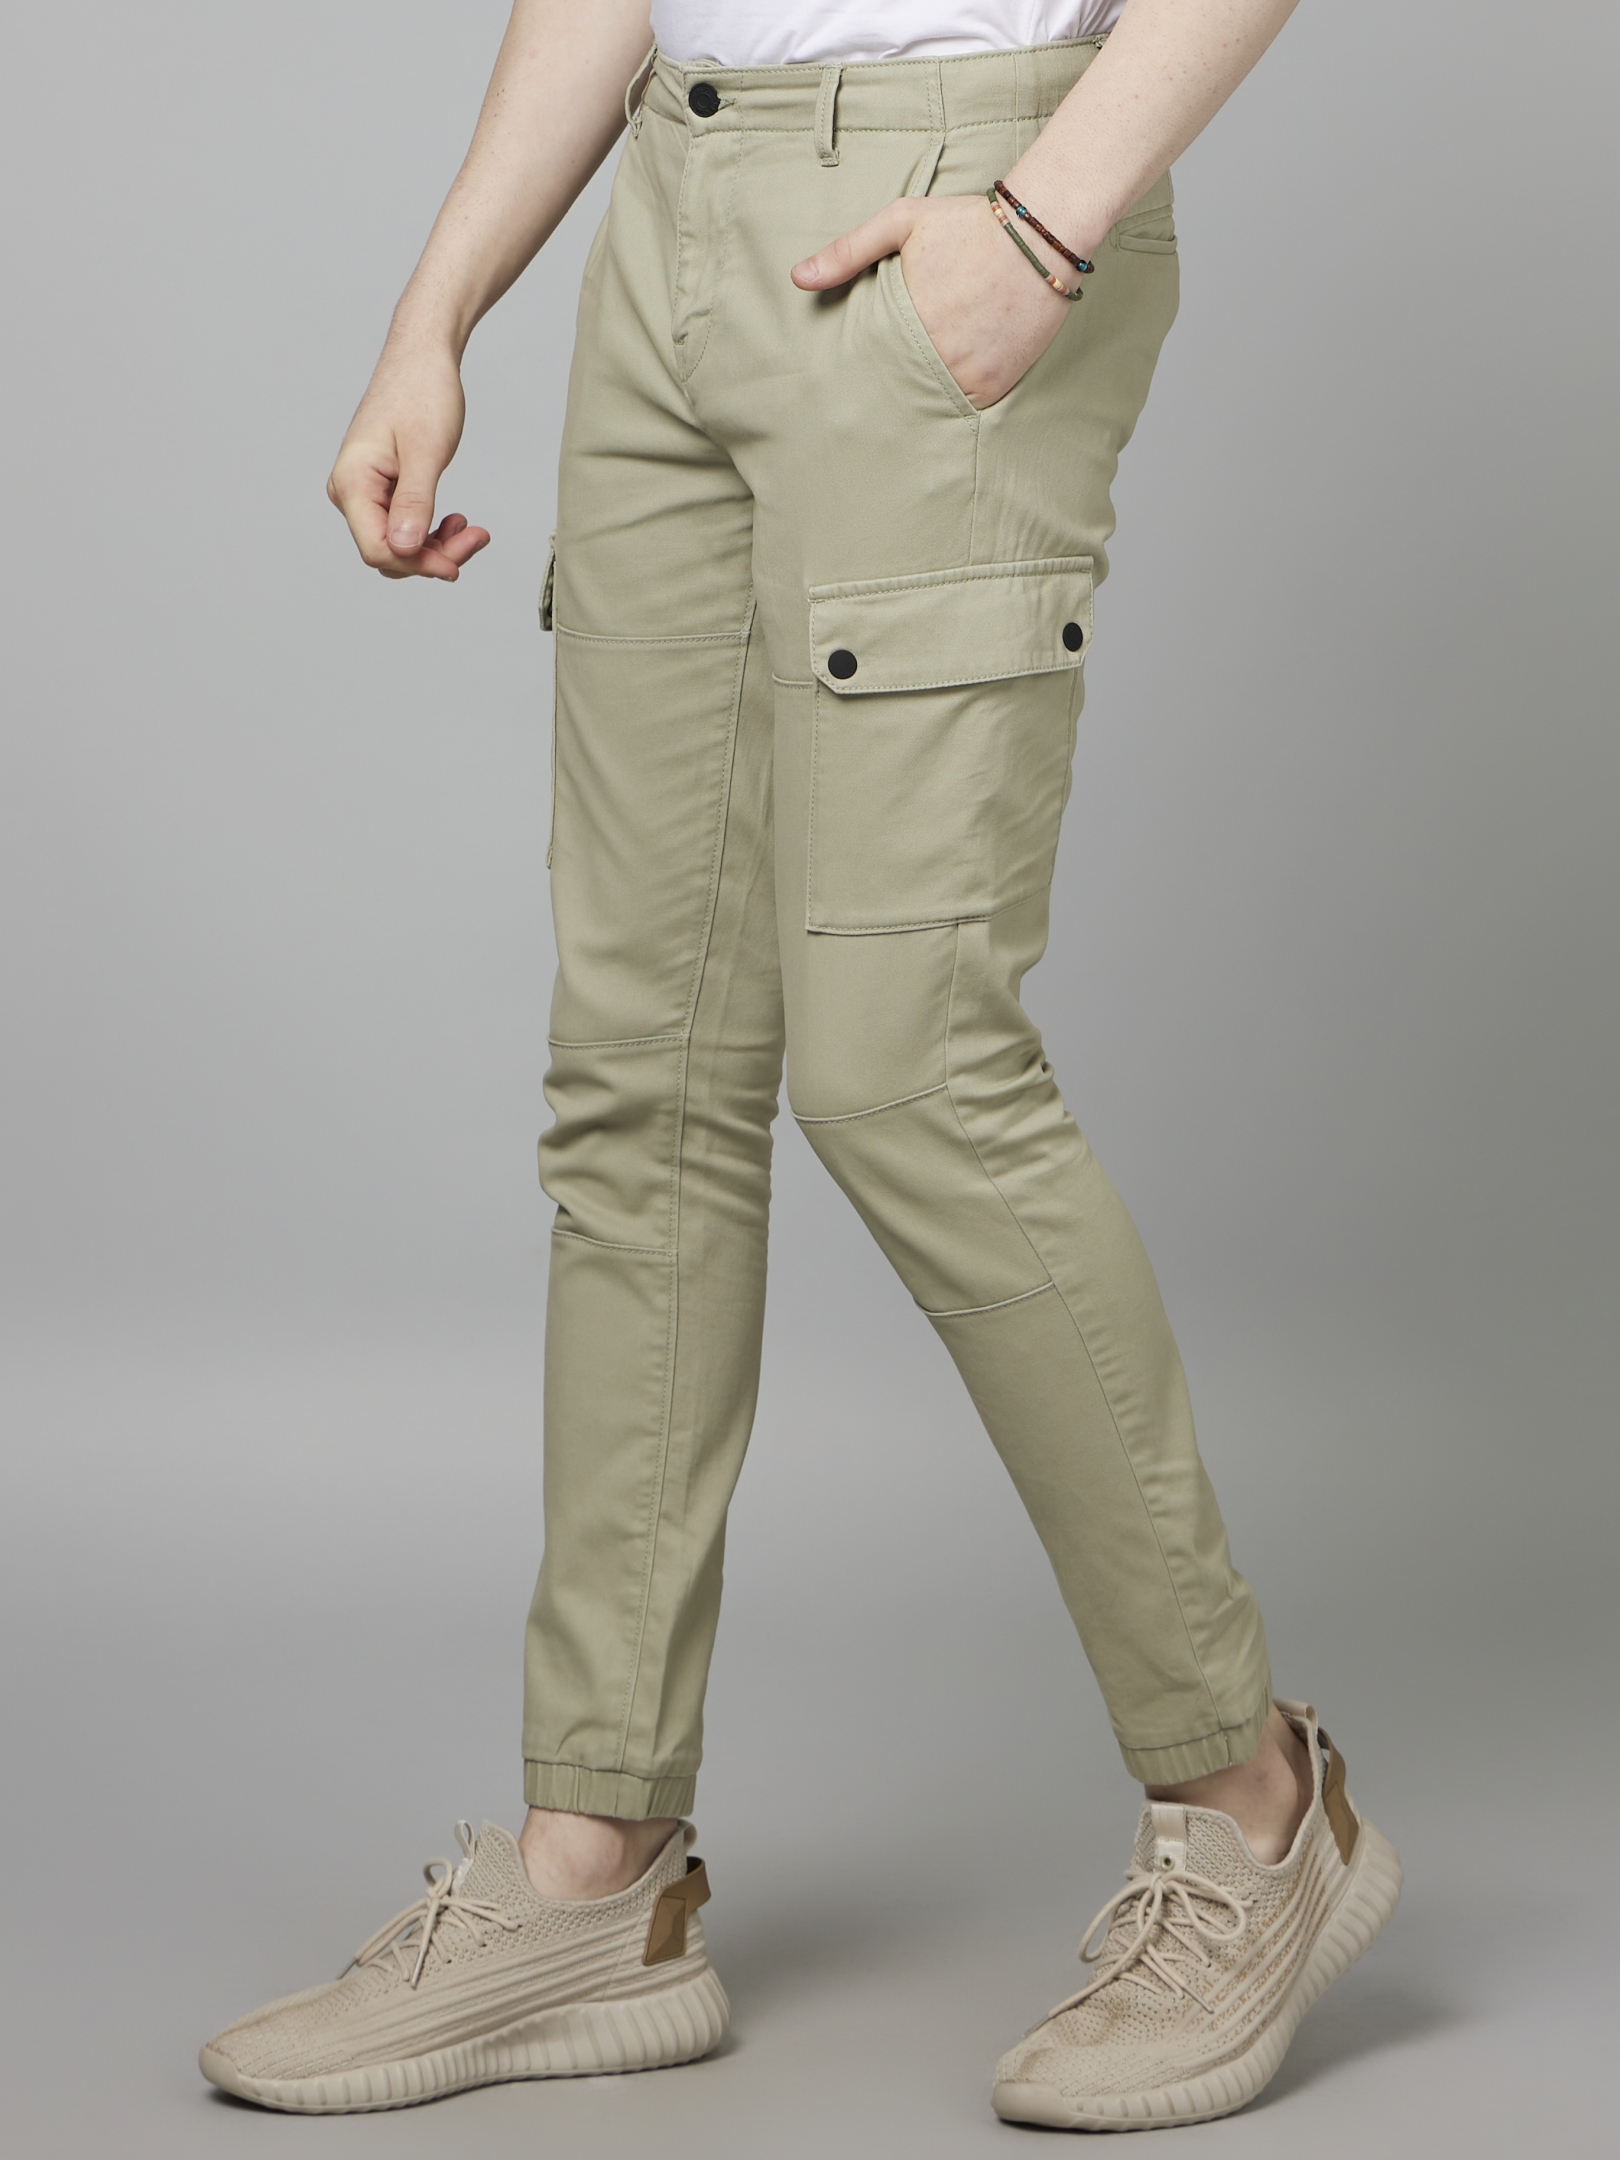 Men's Green Cotton Blend Solid Trousers